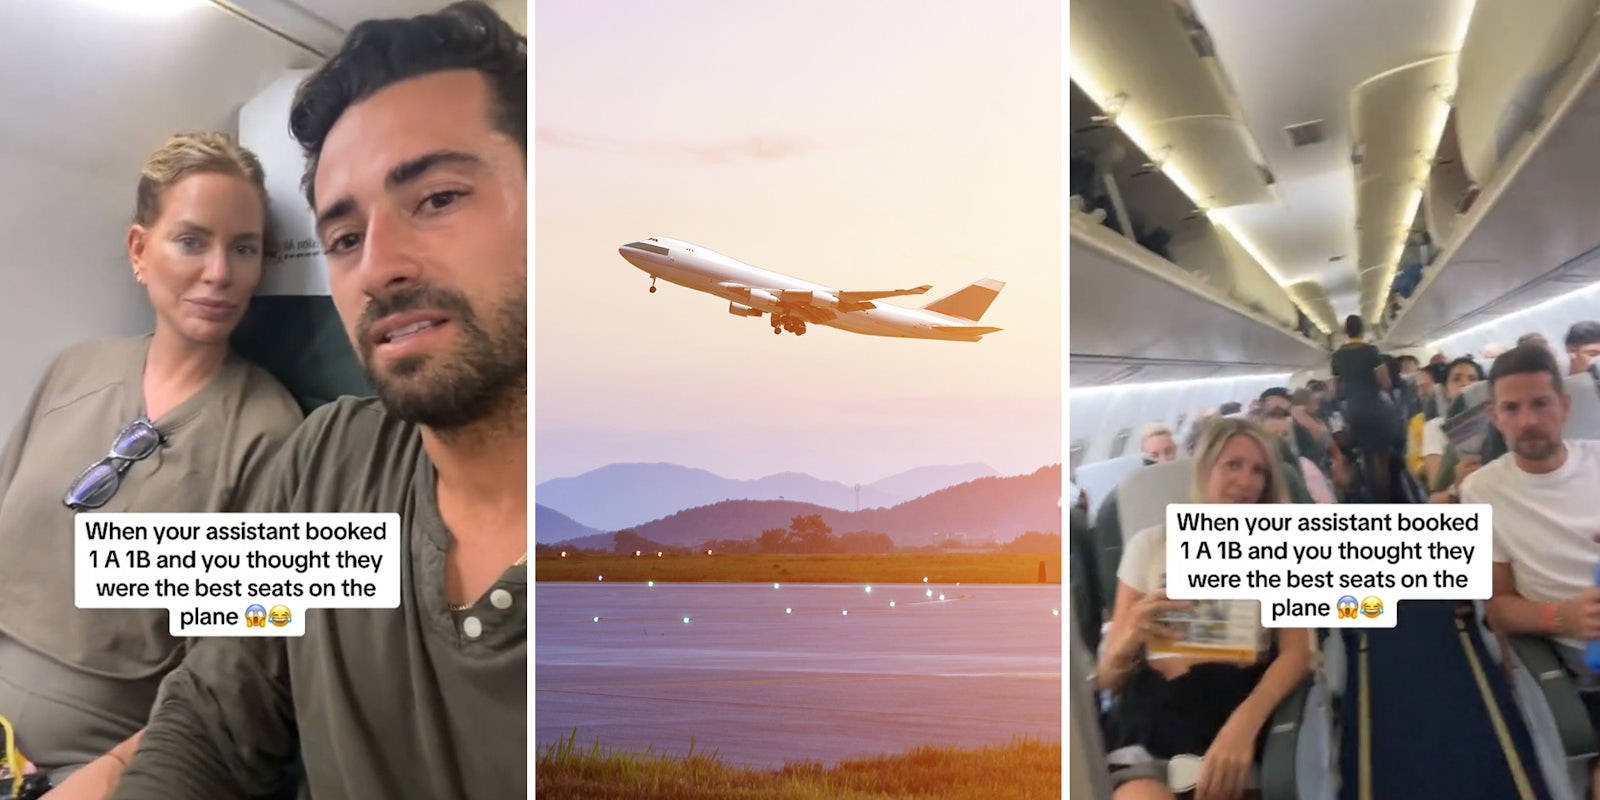 Travelers think they got the ‘best seats’ on the plane. They’re shocked when they board